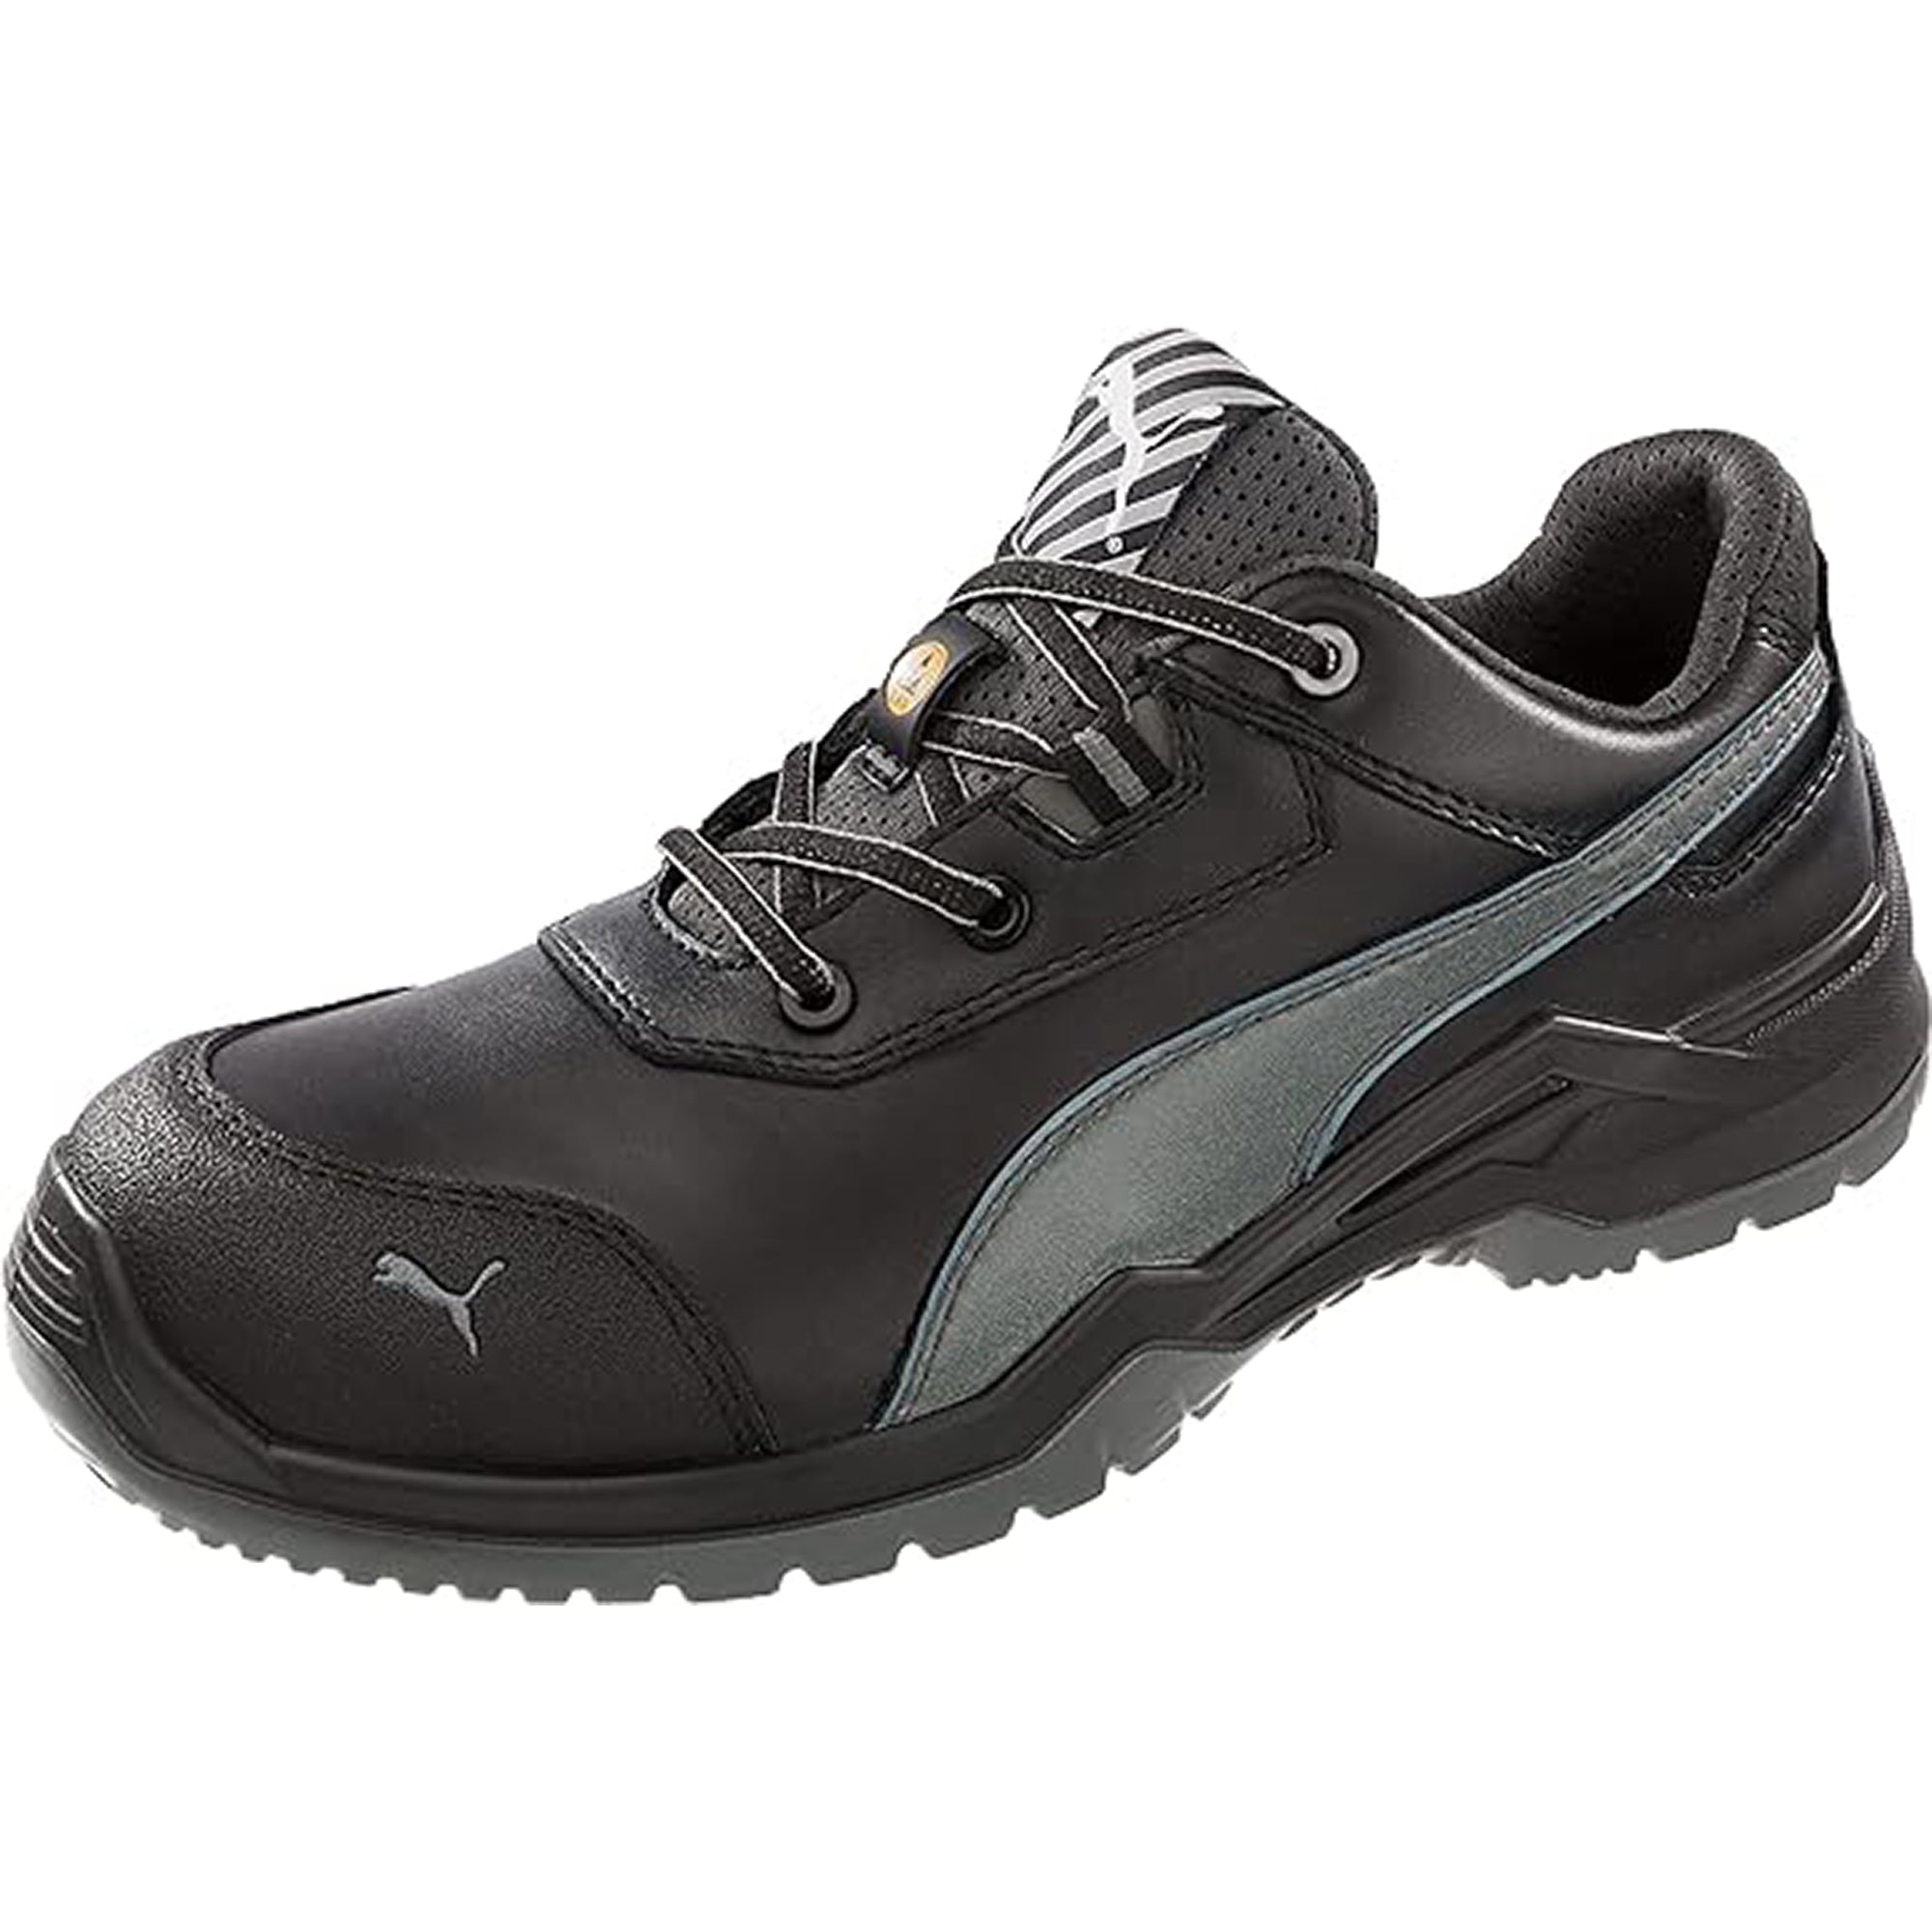 PUMA SAFETY ARGON RX Low S3 SRC ESD Cap Toe Black Safety work boots shoes